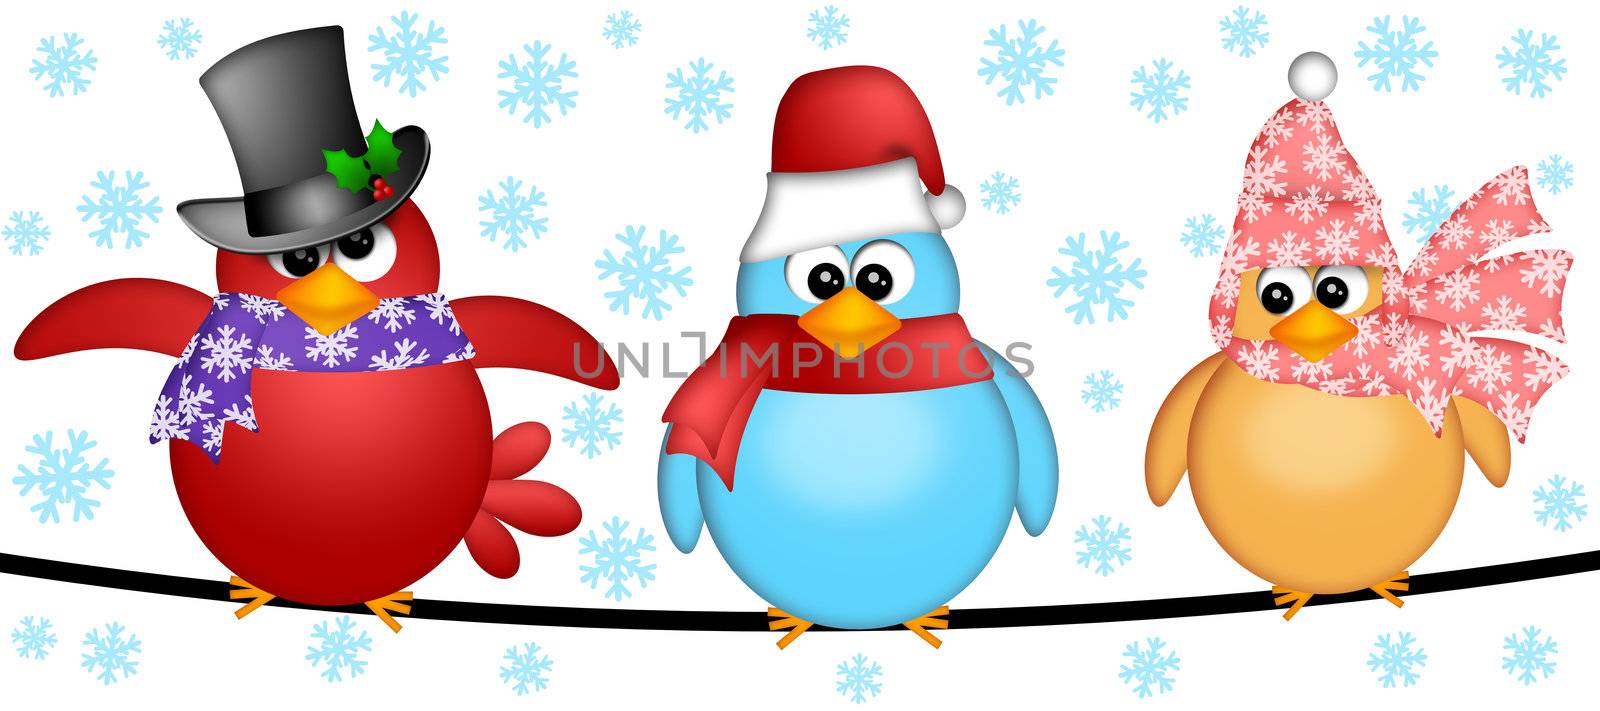 Three Christmas Birds on a Wire Illustration by jpldesigns